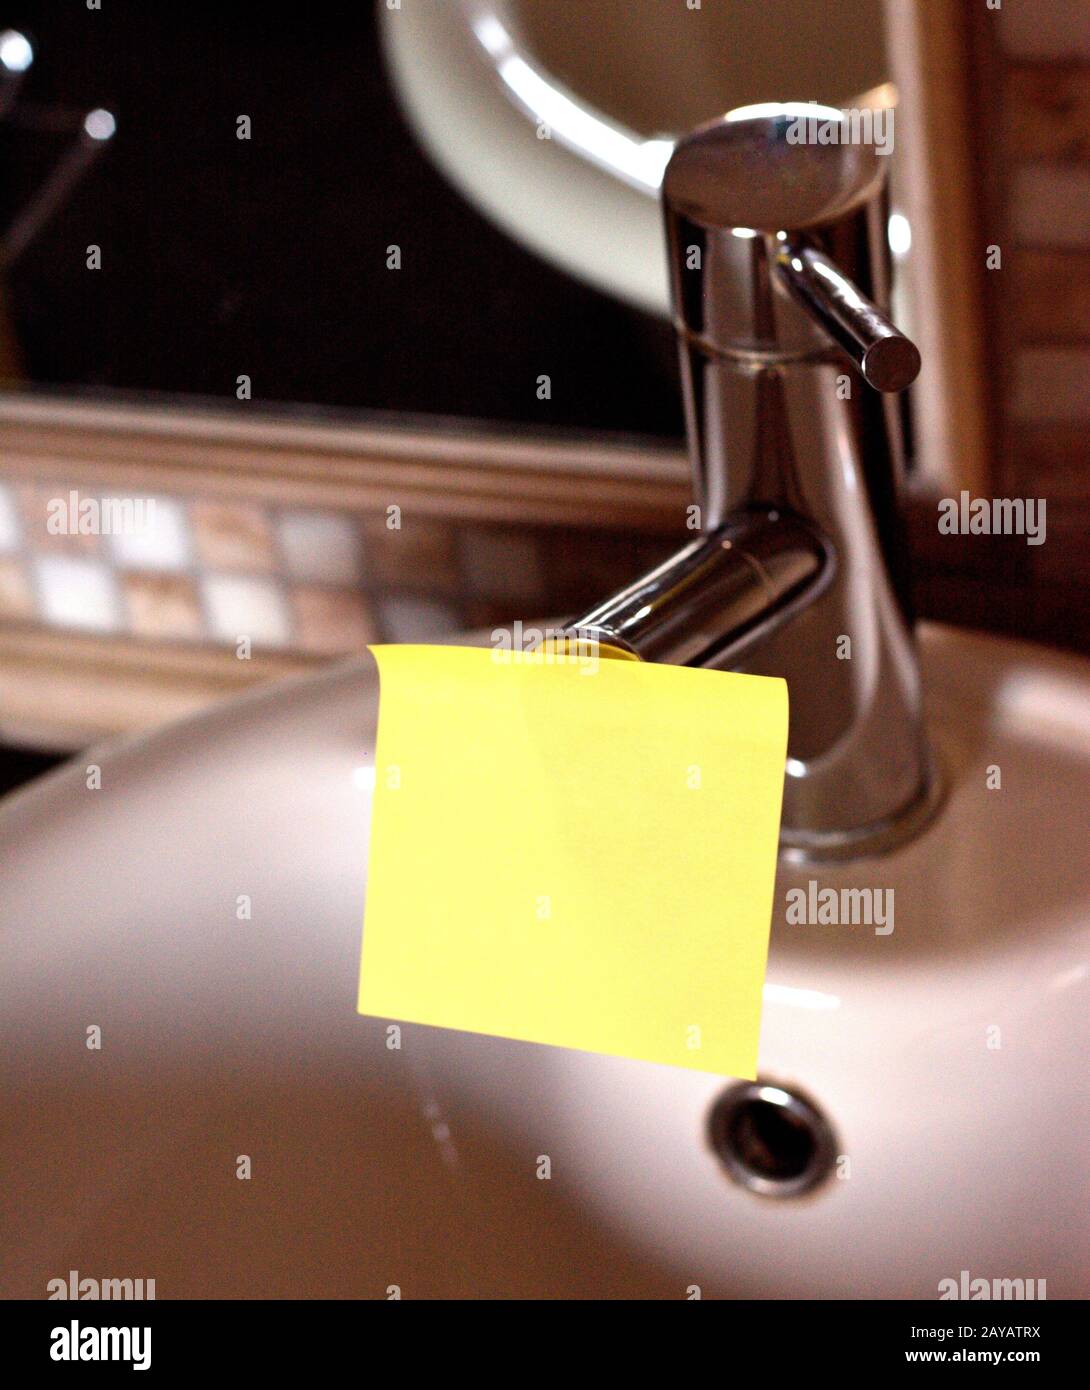 Rectangular yellow note paper attached on toilet sink faucet. Piece of square sheet use to give notation stick to water tap in t Stock Photo